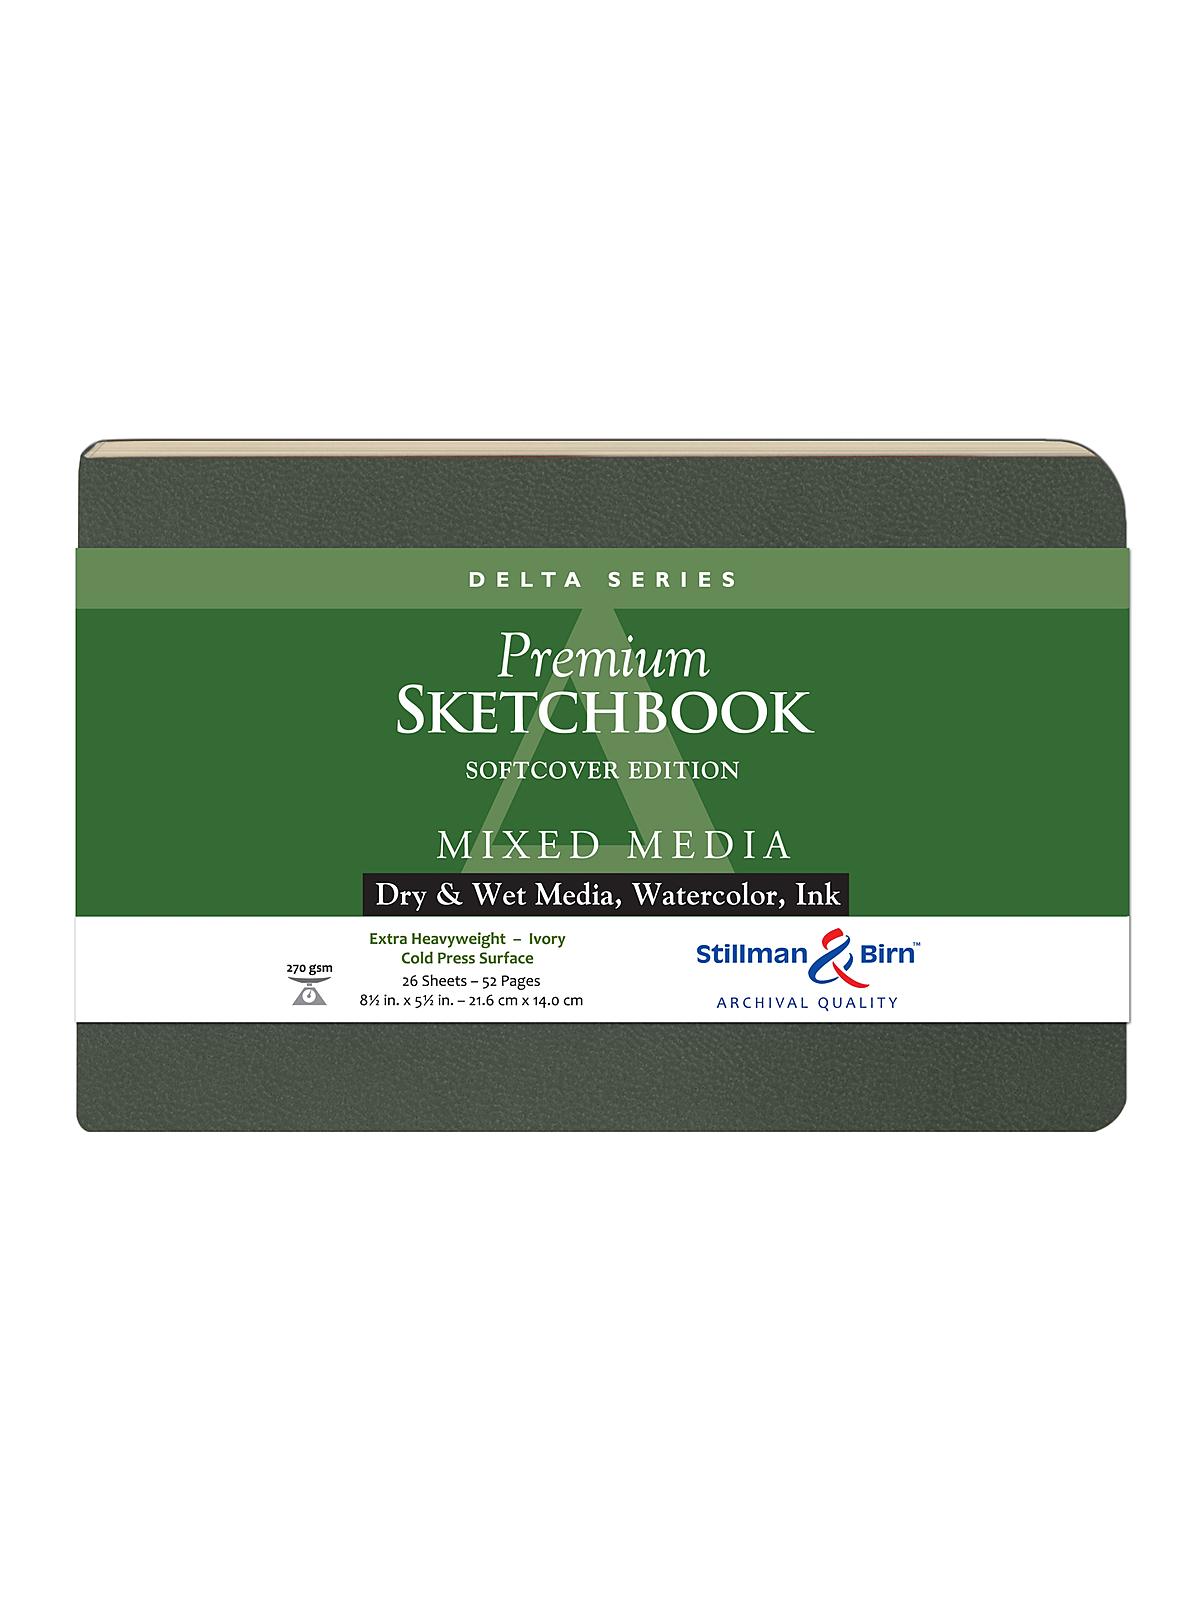 Delta Series Softcover Sketchbooks 8.5 In. X 5.5 In. Landscape 56 Pages